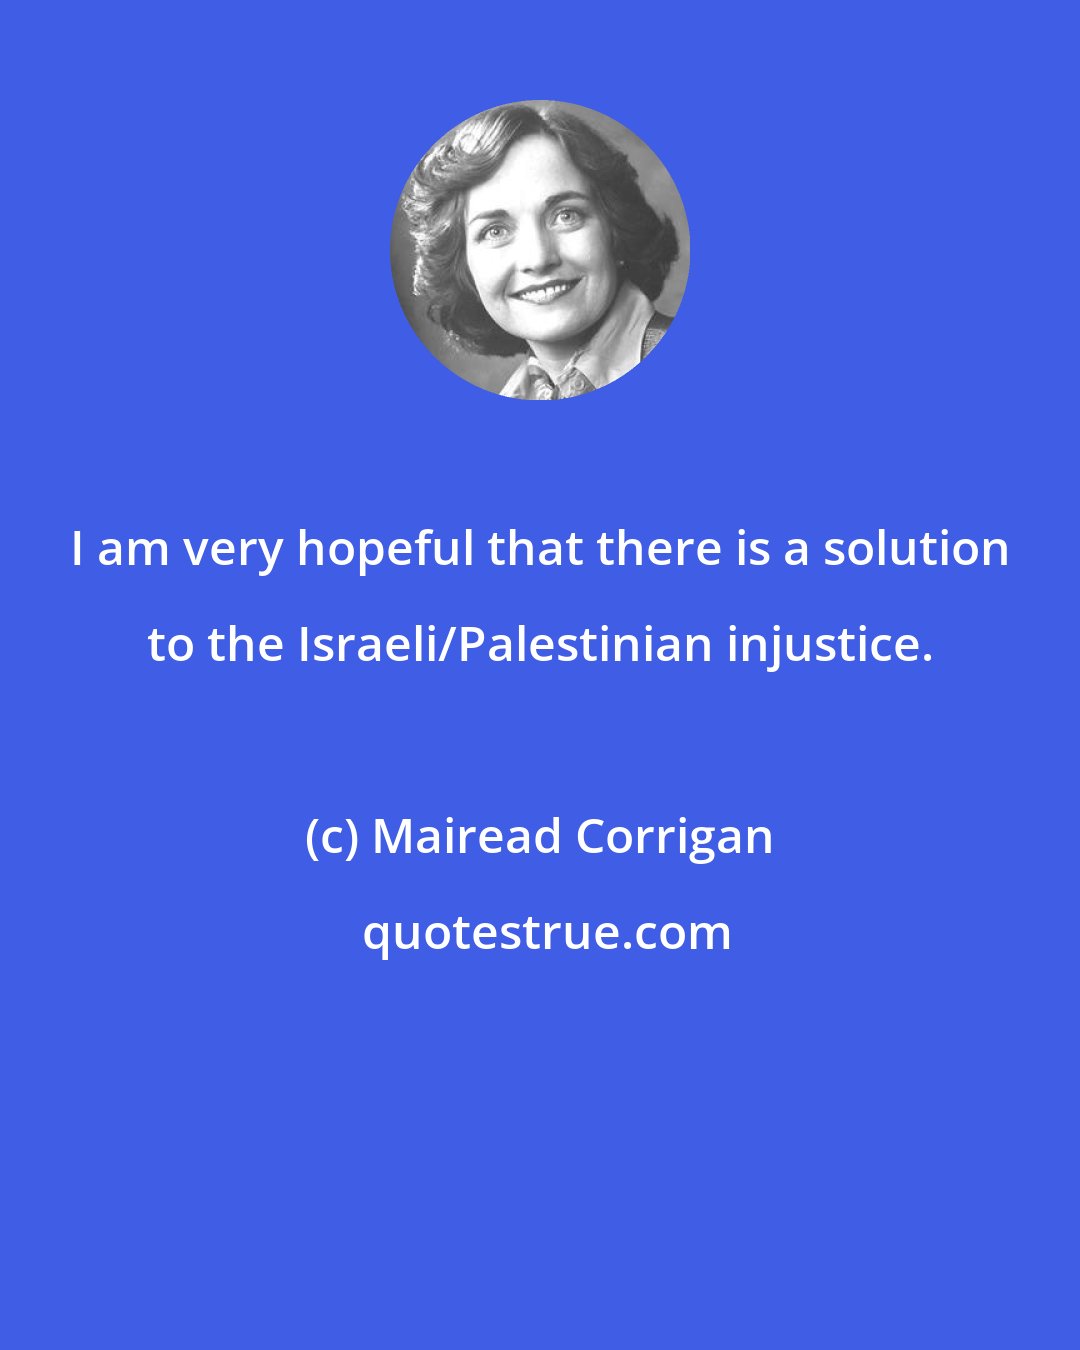 Mairead Corrigan: I am very hopeful that there is a solution to the Israeli/Palestinian injustice.